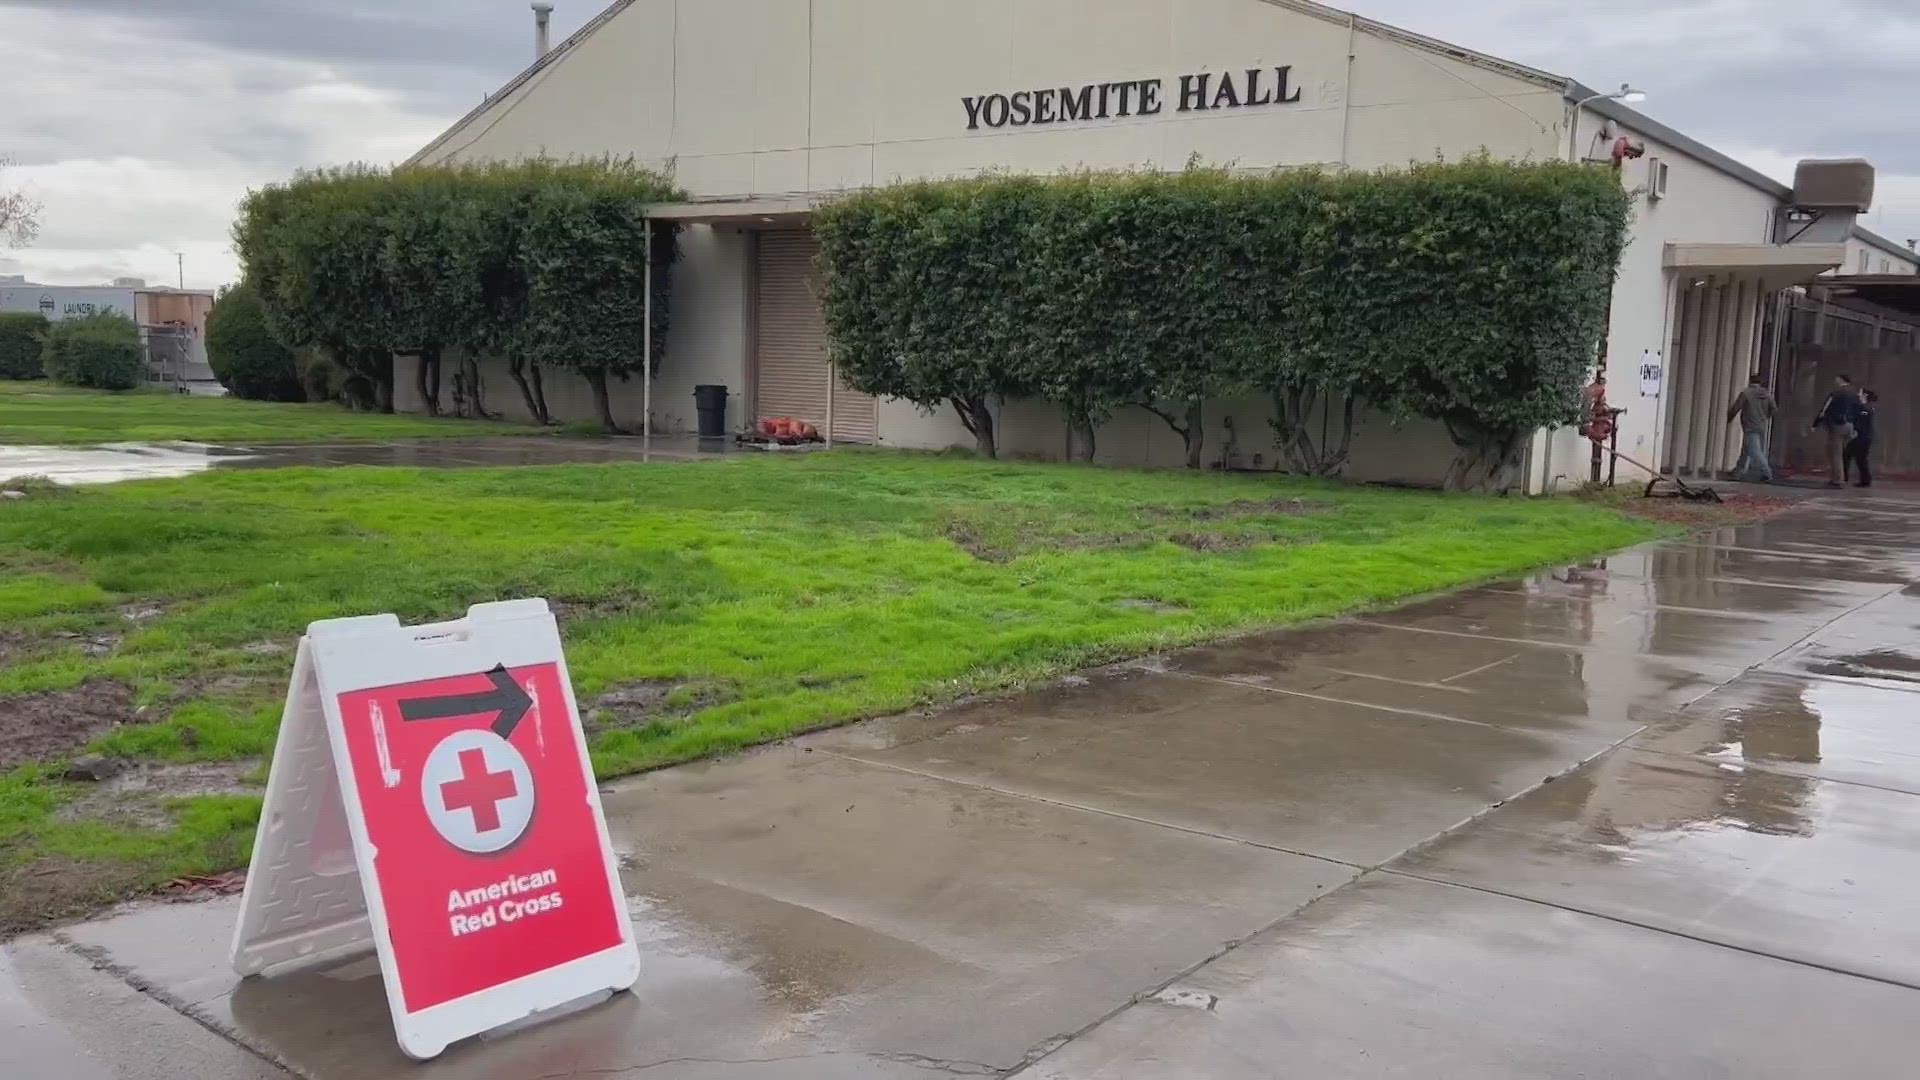 March is American Red Cross Month. It's opened 145 shelters across California since December with more in the works.